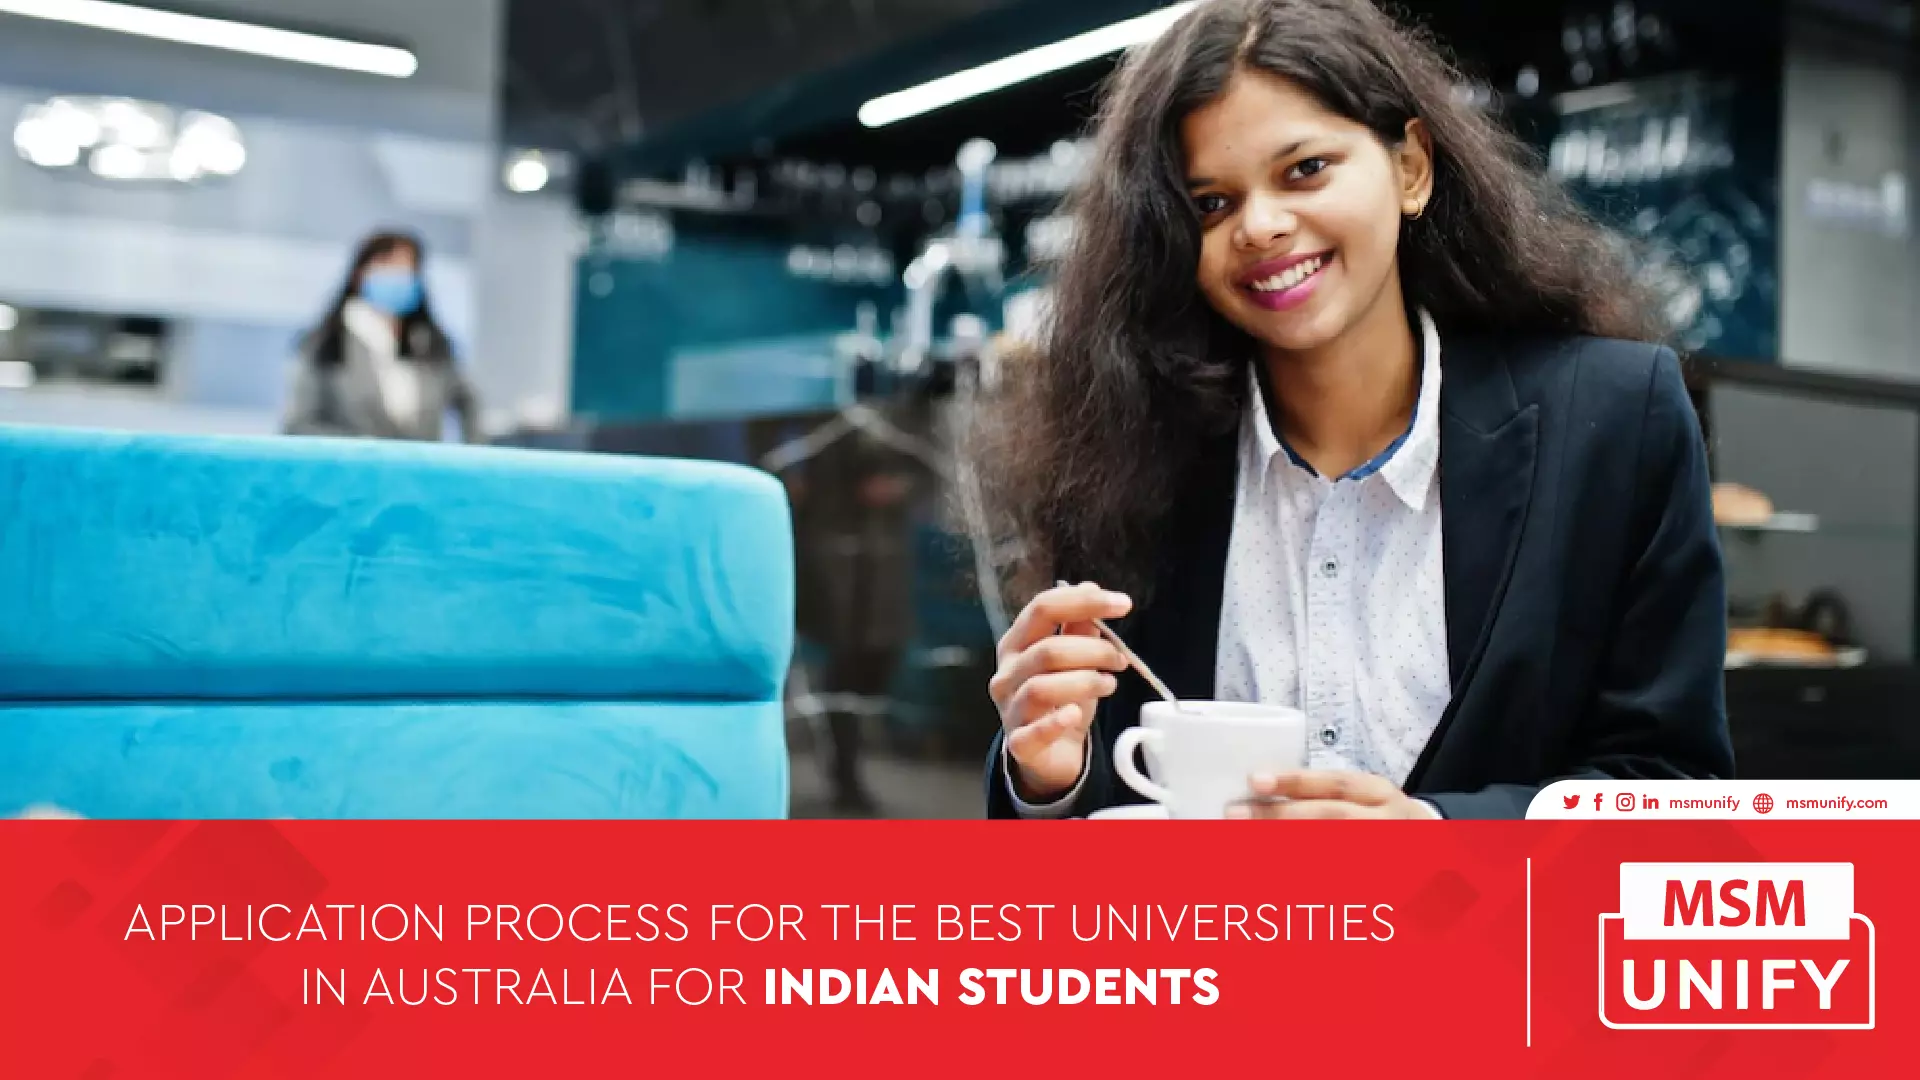 MSM Unify Application proceed for best universities in AUS for Indian Students